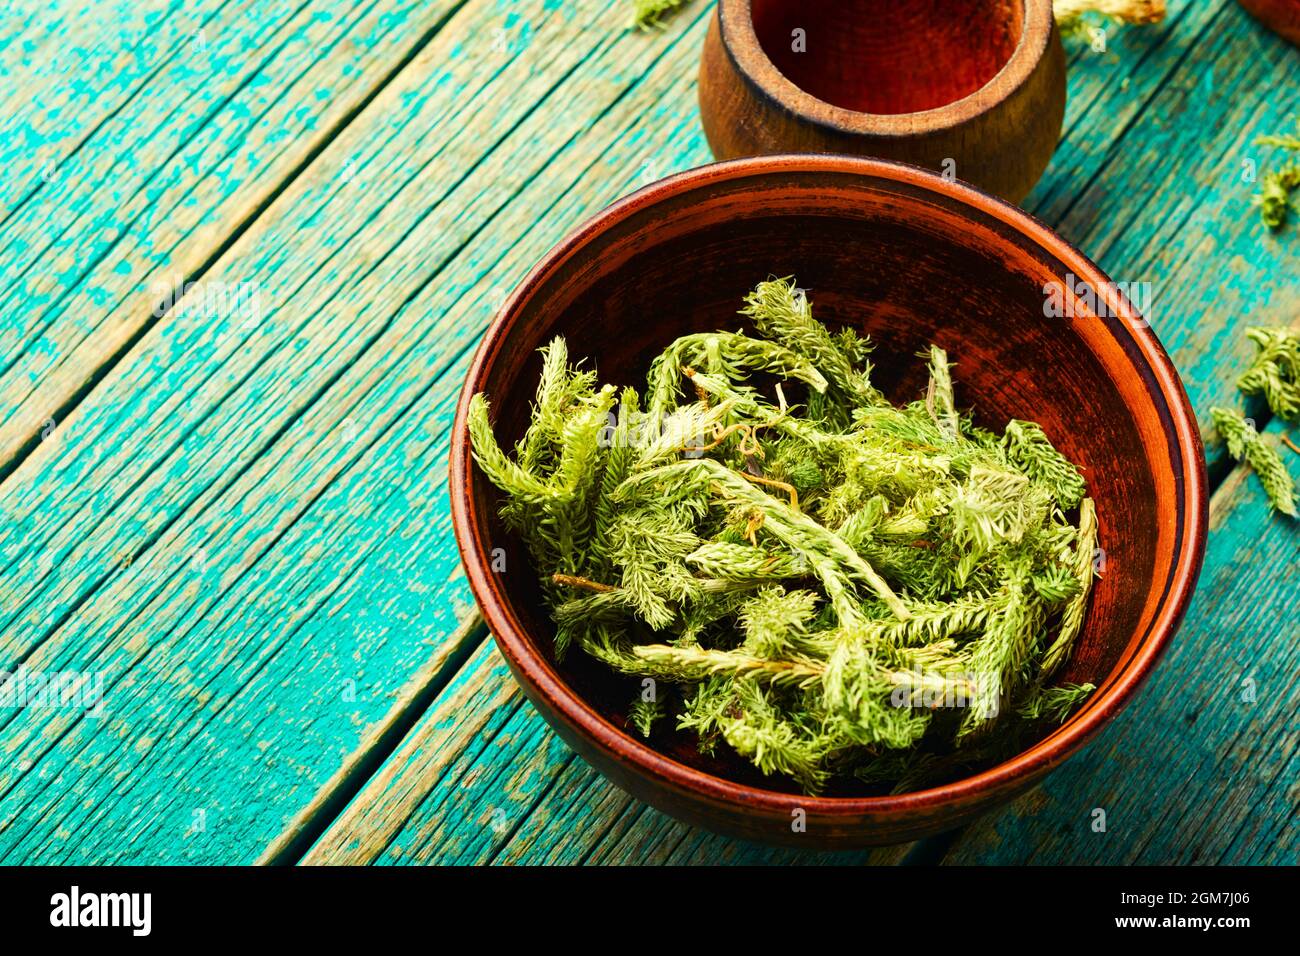 Dried lycopodium healing herbs in a clay bowl.Lycopodium healing herbs.Herbal medicine Stock Photo